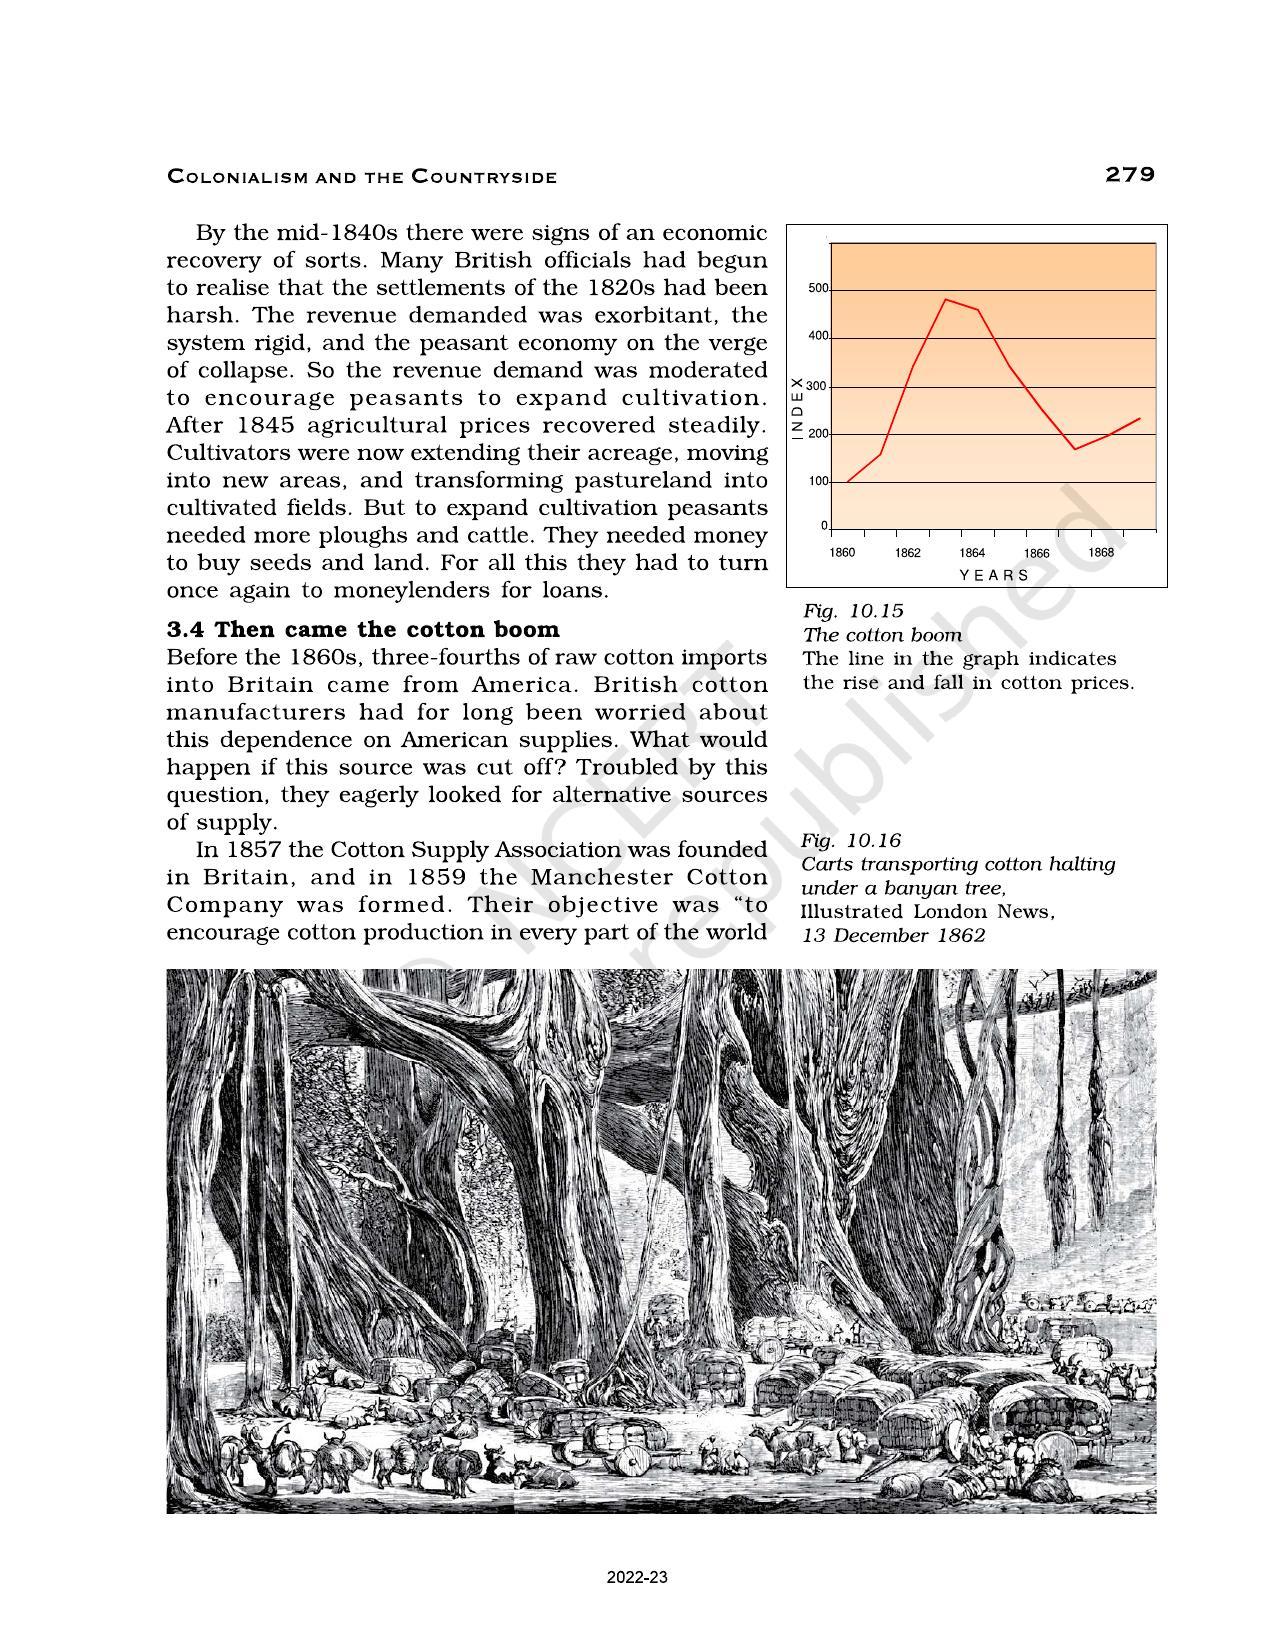 NCERT Book for Class 12 History (Part-II) Chapter 10 Colonialism and the Countryside - Page 23